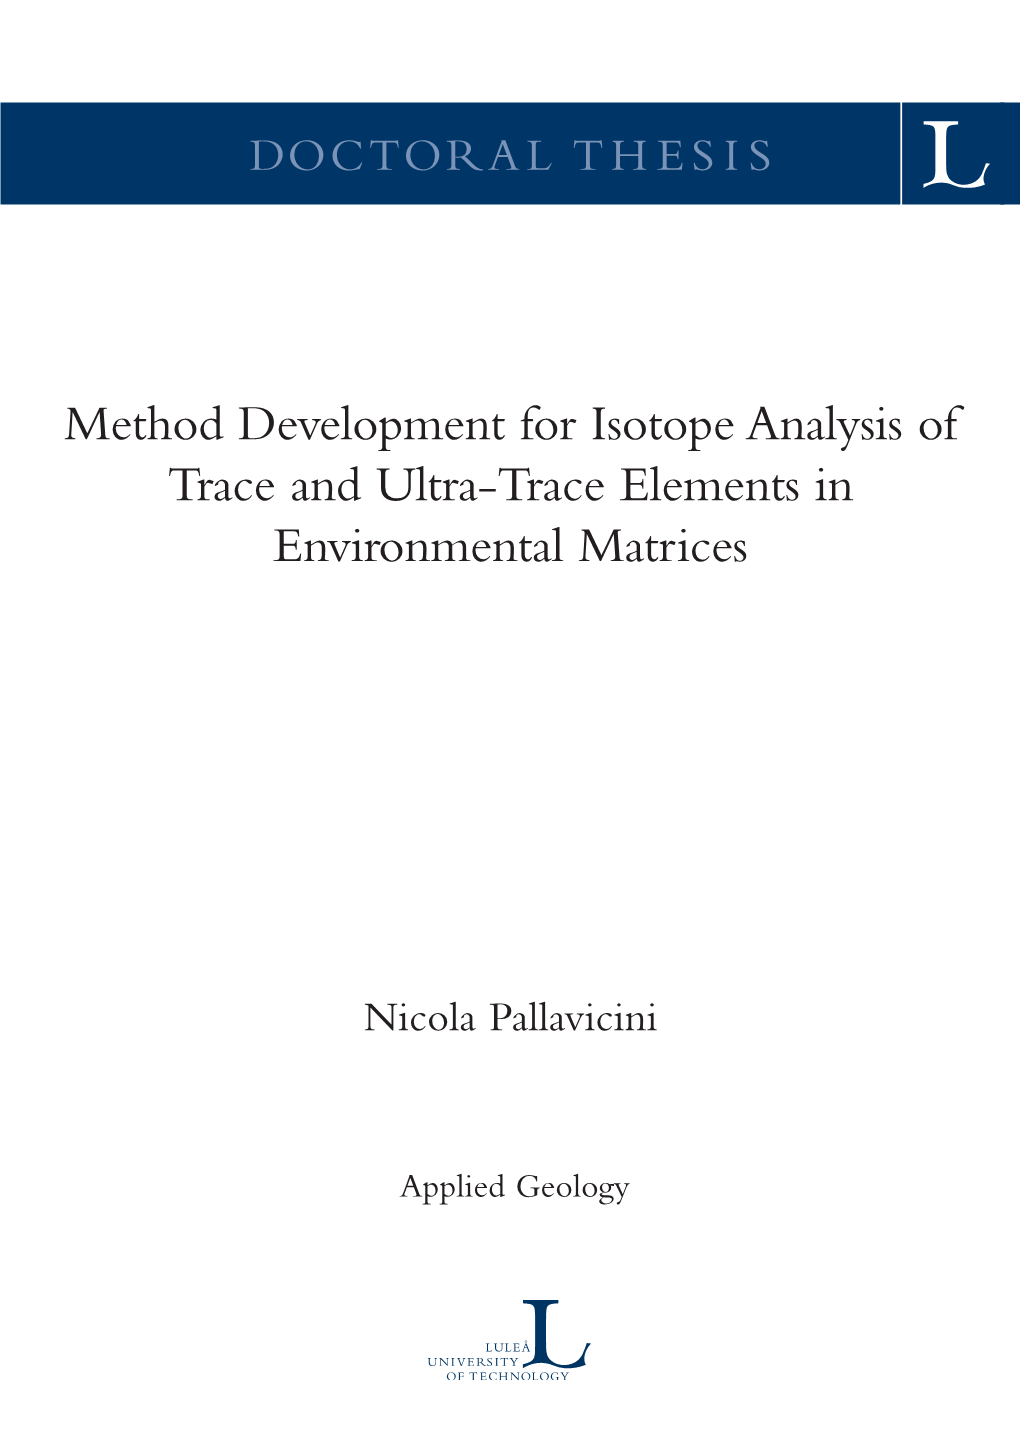 Method Development for Isotope Analysis of Trace and Ultra-Trace Elements in Environmental Matrices